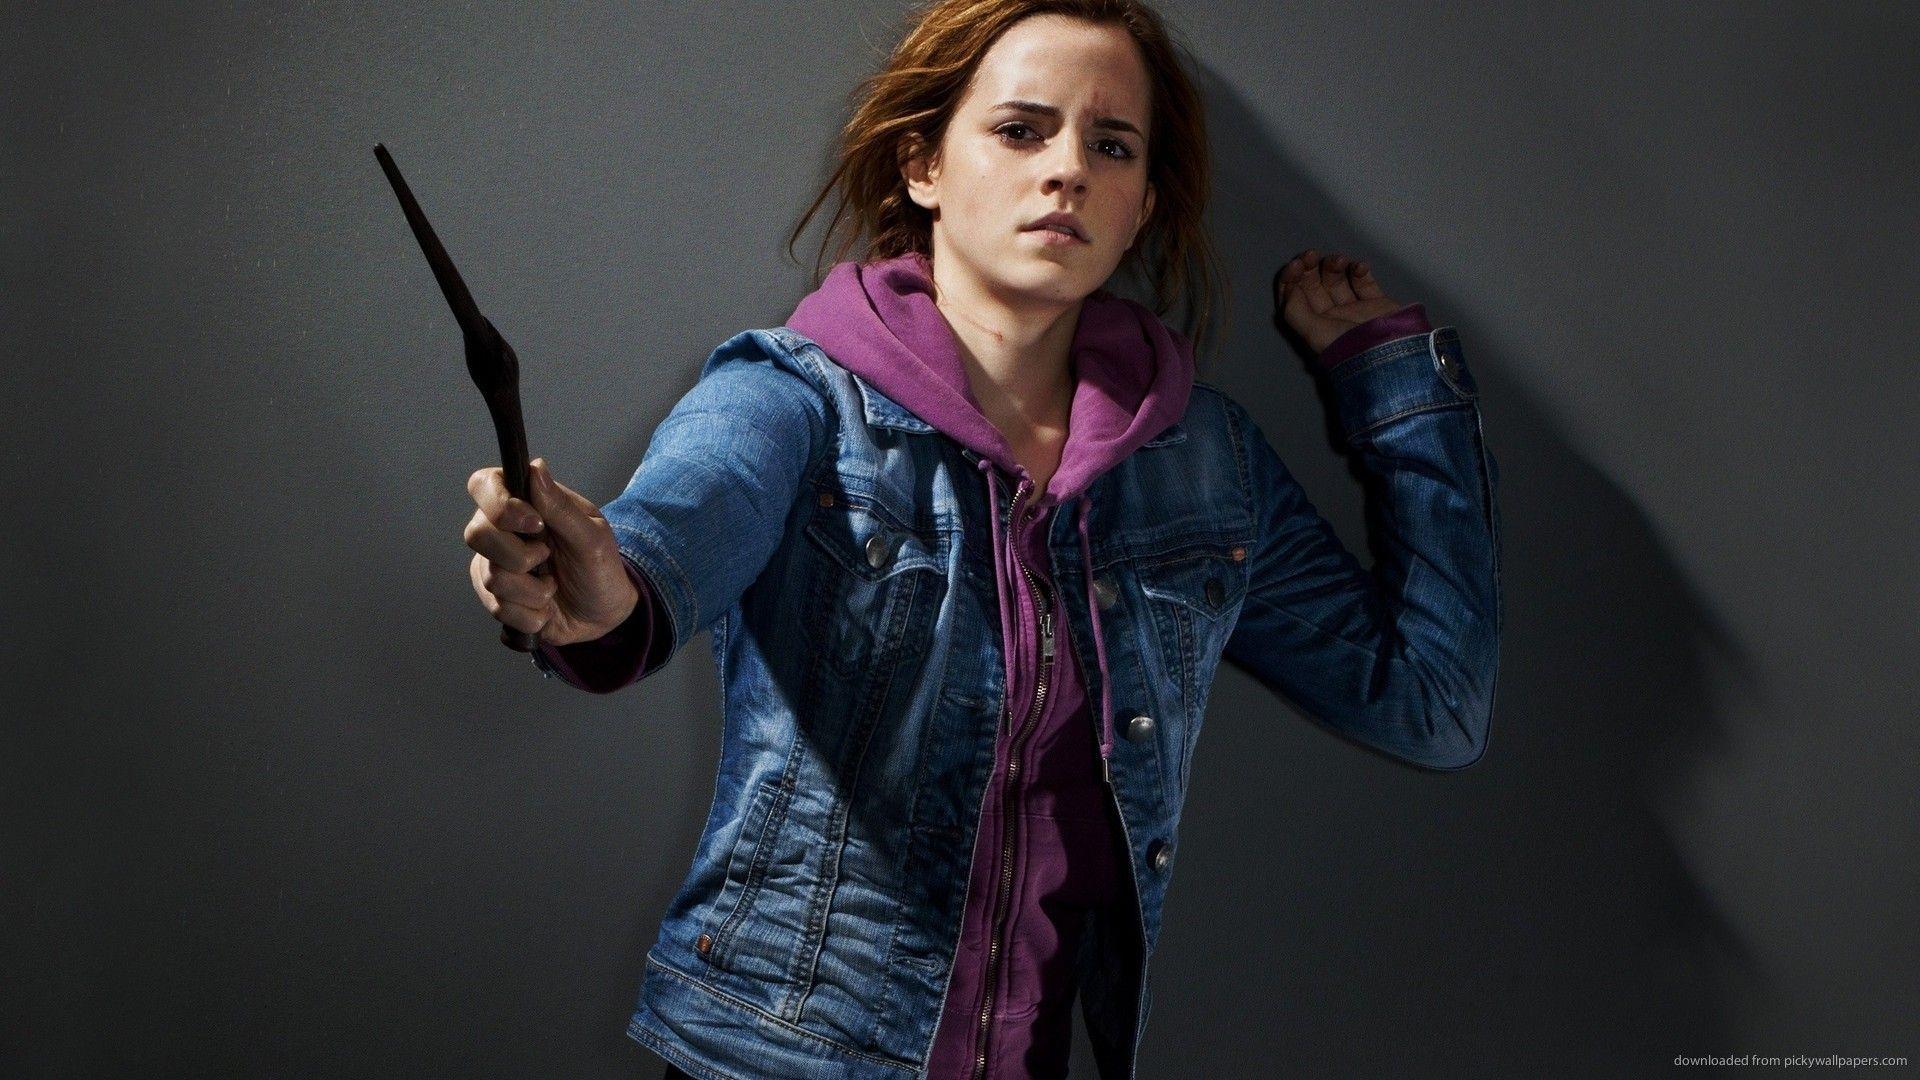 Hermione Granger With A Magic Wand Wallpaper For Samsung Galaxy Tab